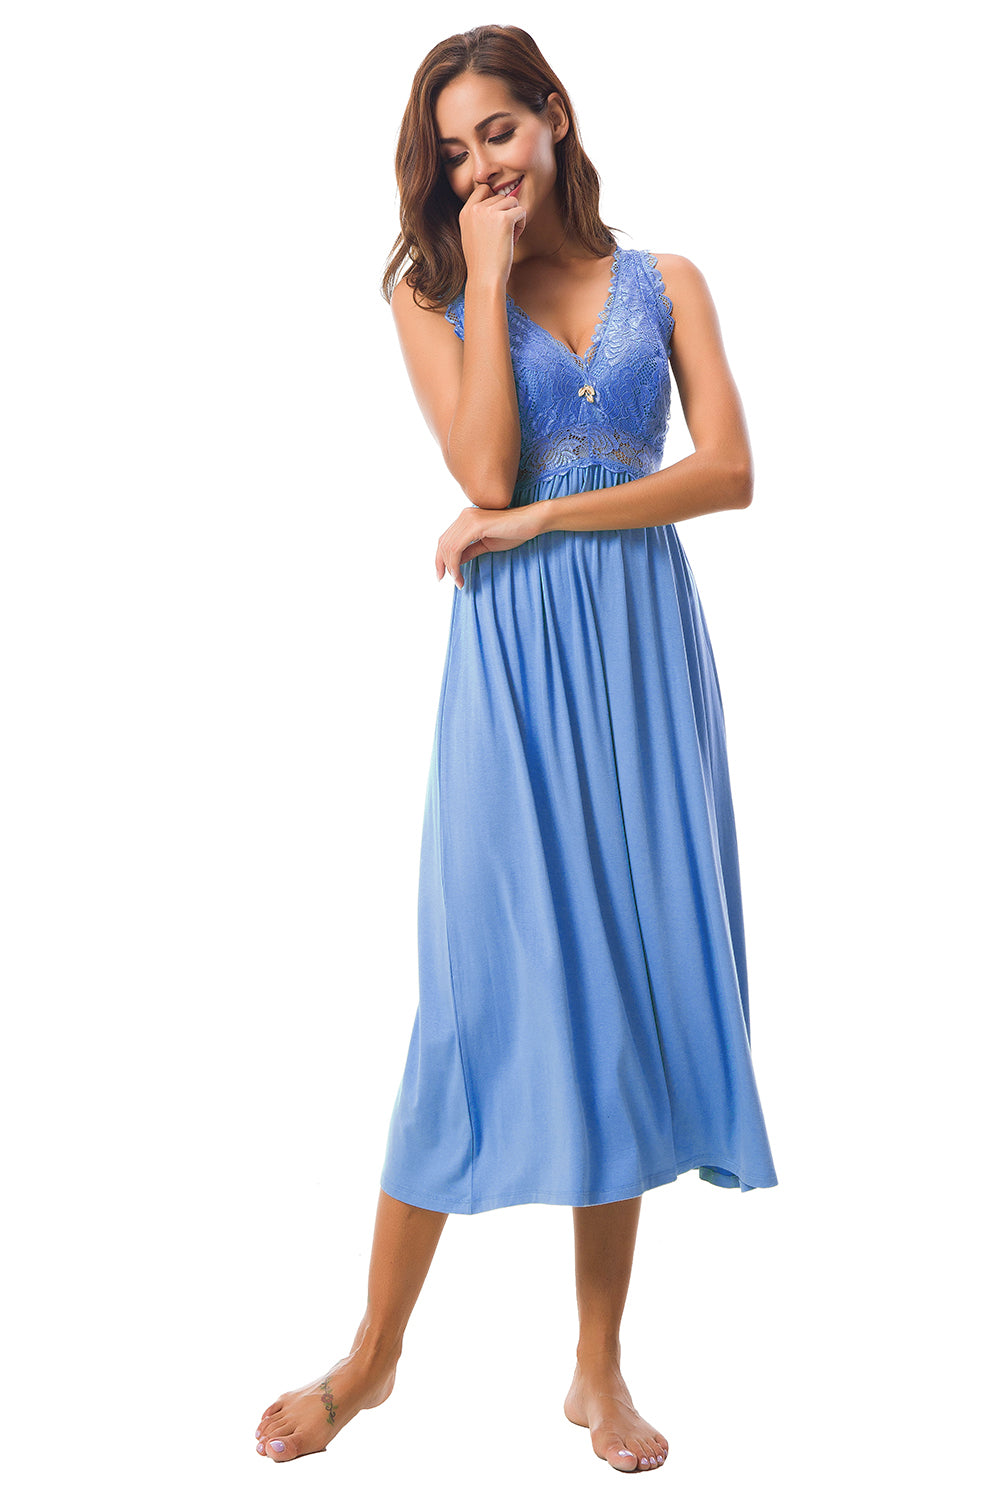 Sexy Lace Jersey Elegant Long Nightgown Chemises Skyblue